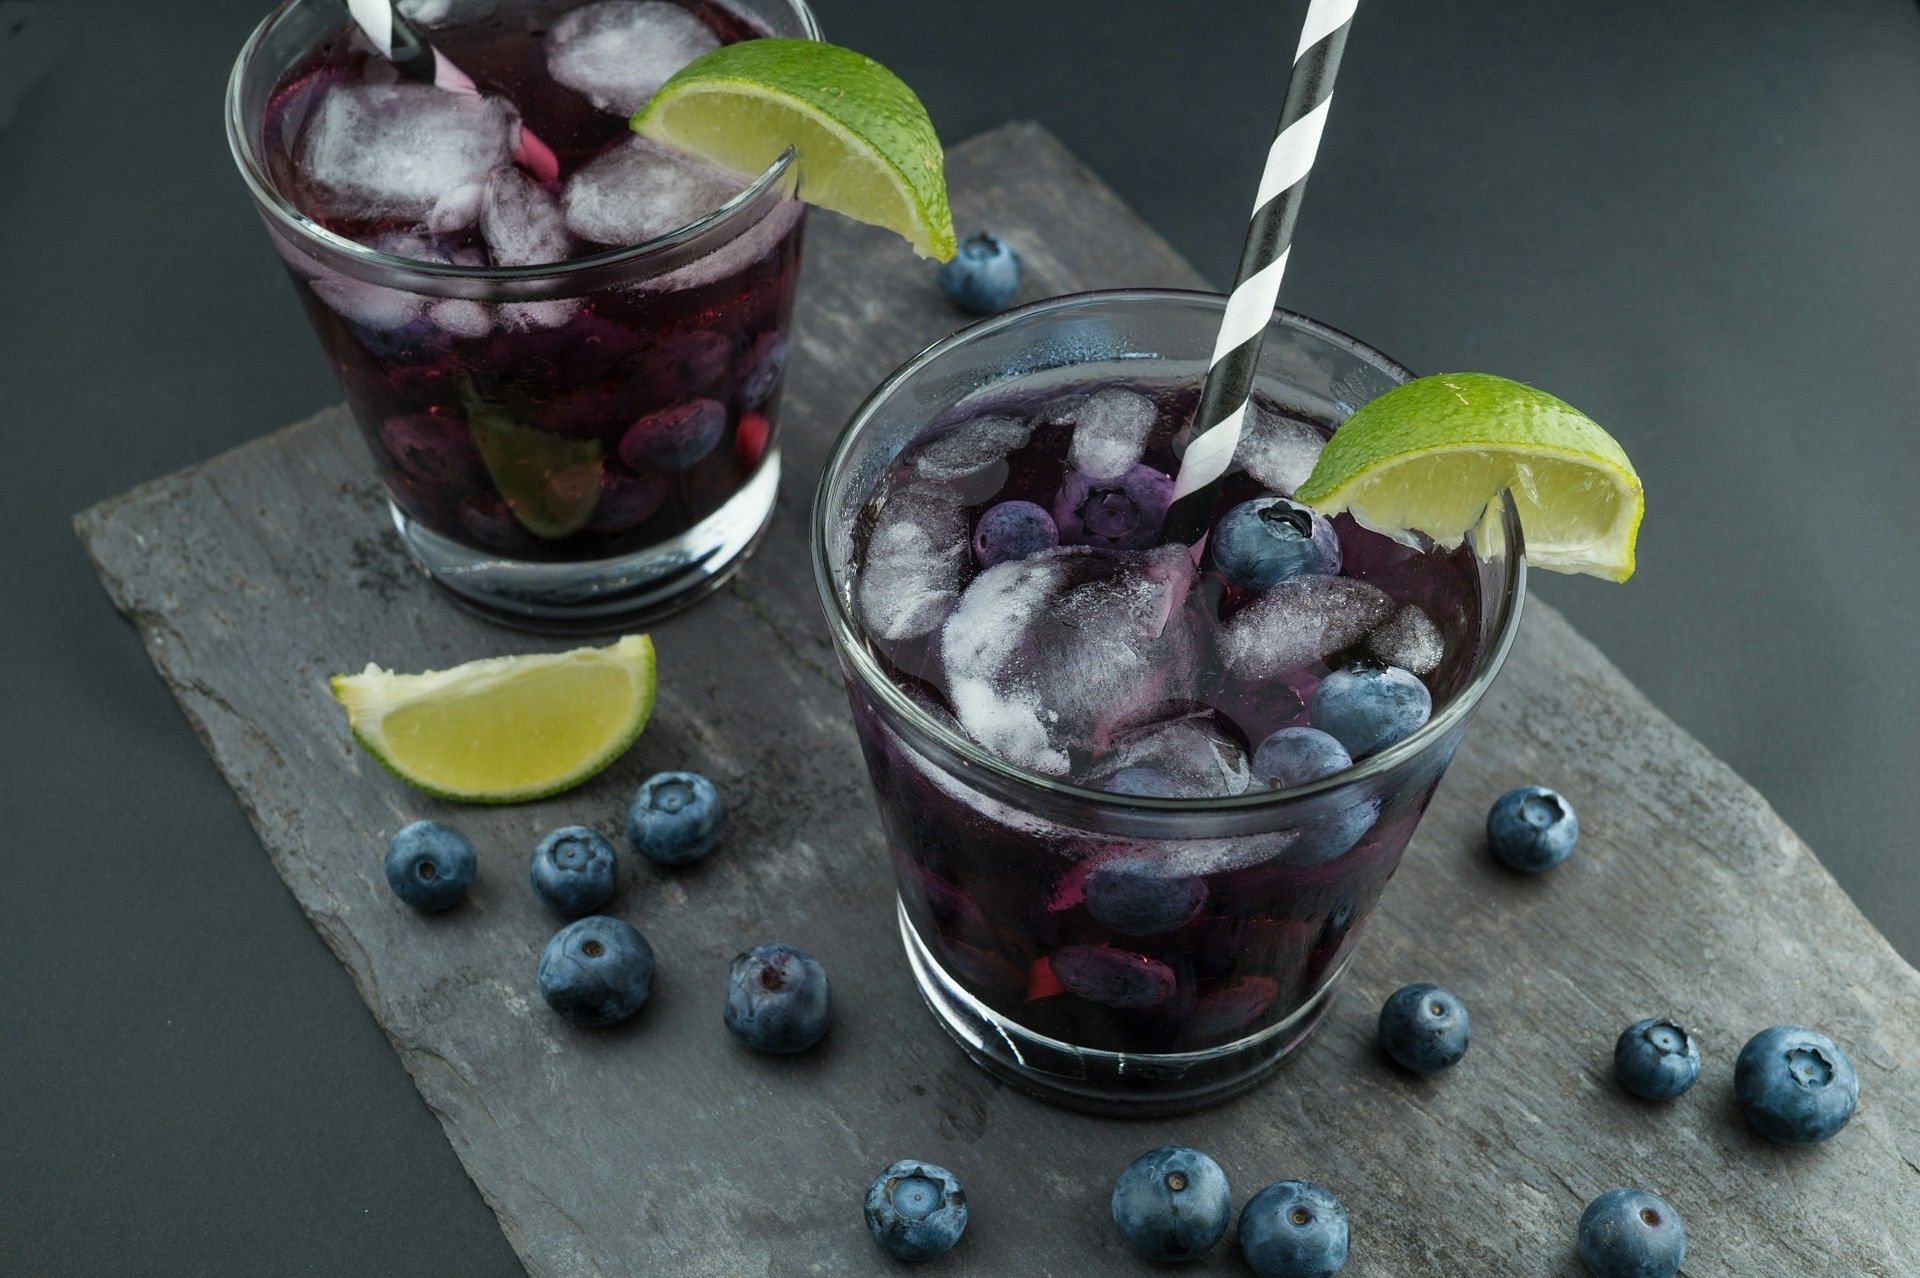 Are you drinking grape juice to prevent stomach bug? (Image by Wesual Click/Unsplash)